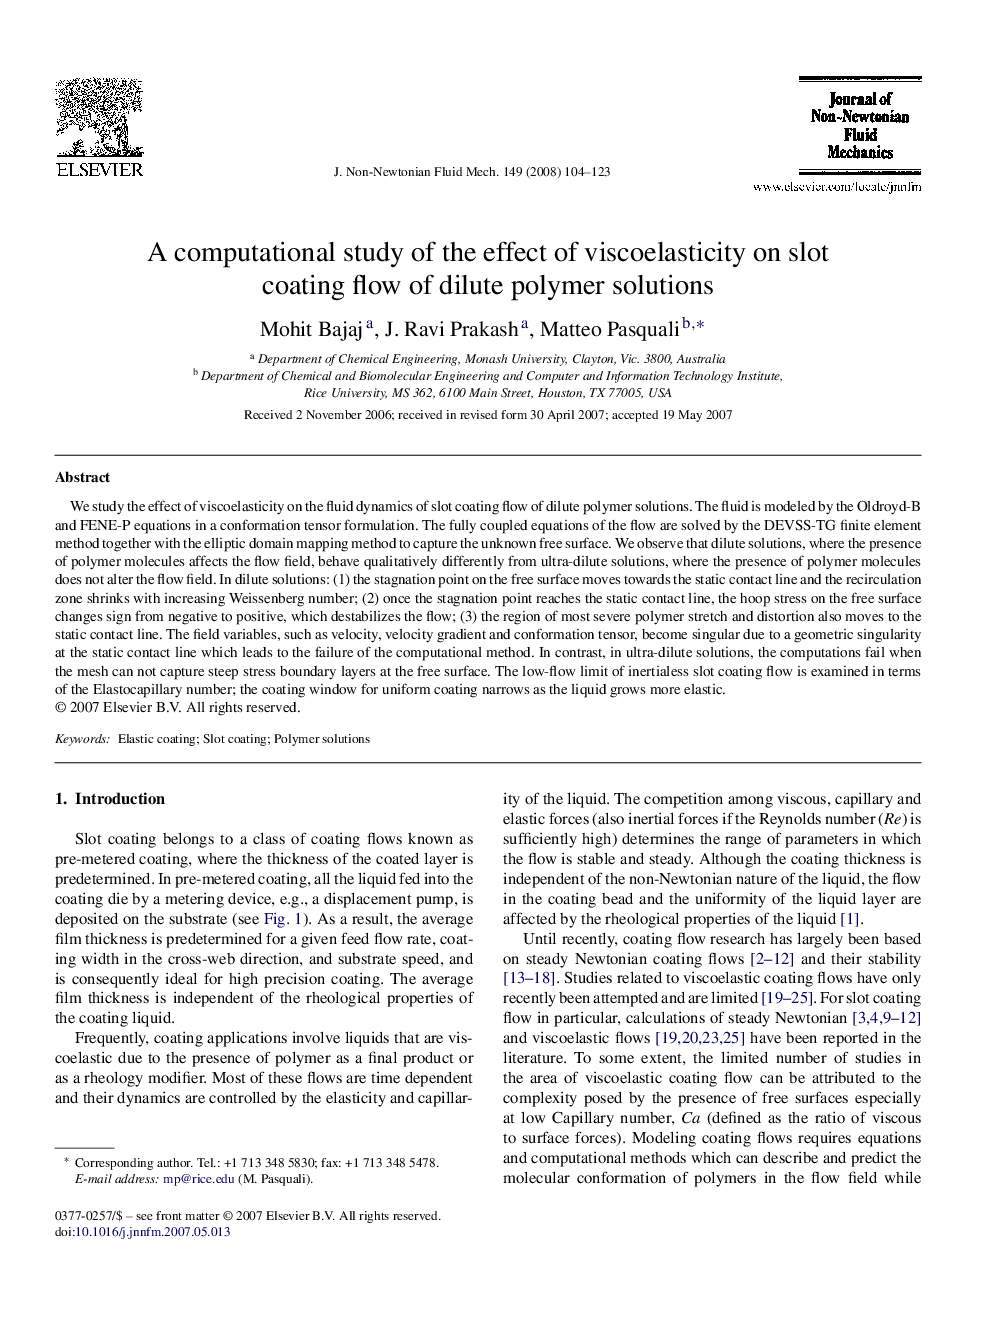 A computational study of the effect of viscoelasticity on slot coating flow of dilute polymer solutions